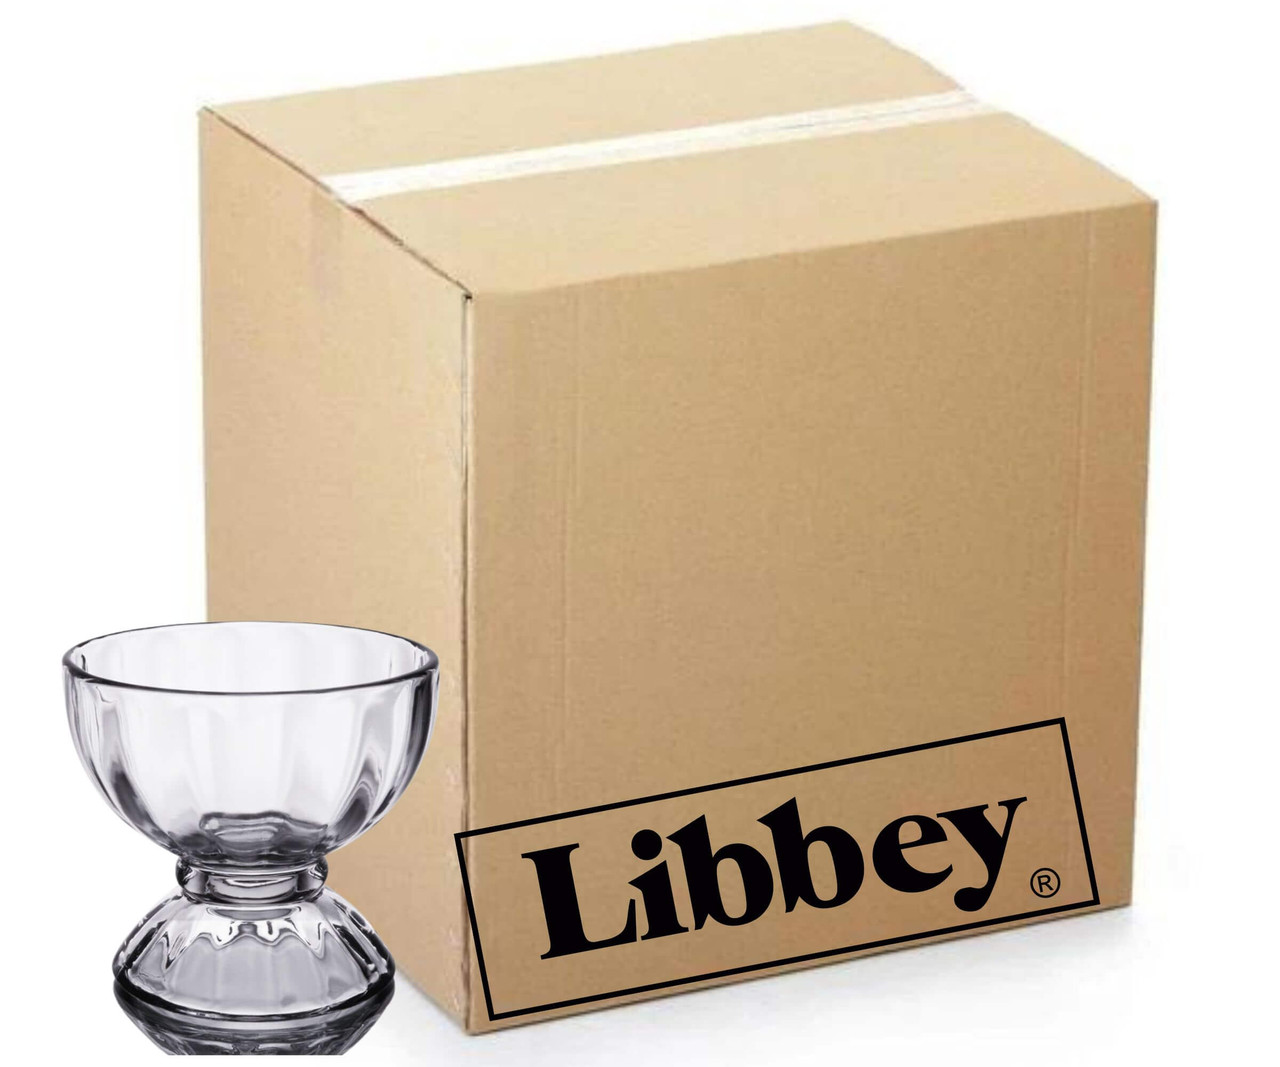 Libbey Case of 24 Durable, Crystal Clear 17 oz. Supreme Glass Bowls-Chicken Pieces